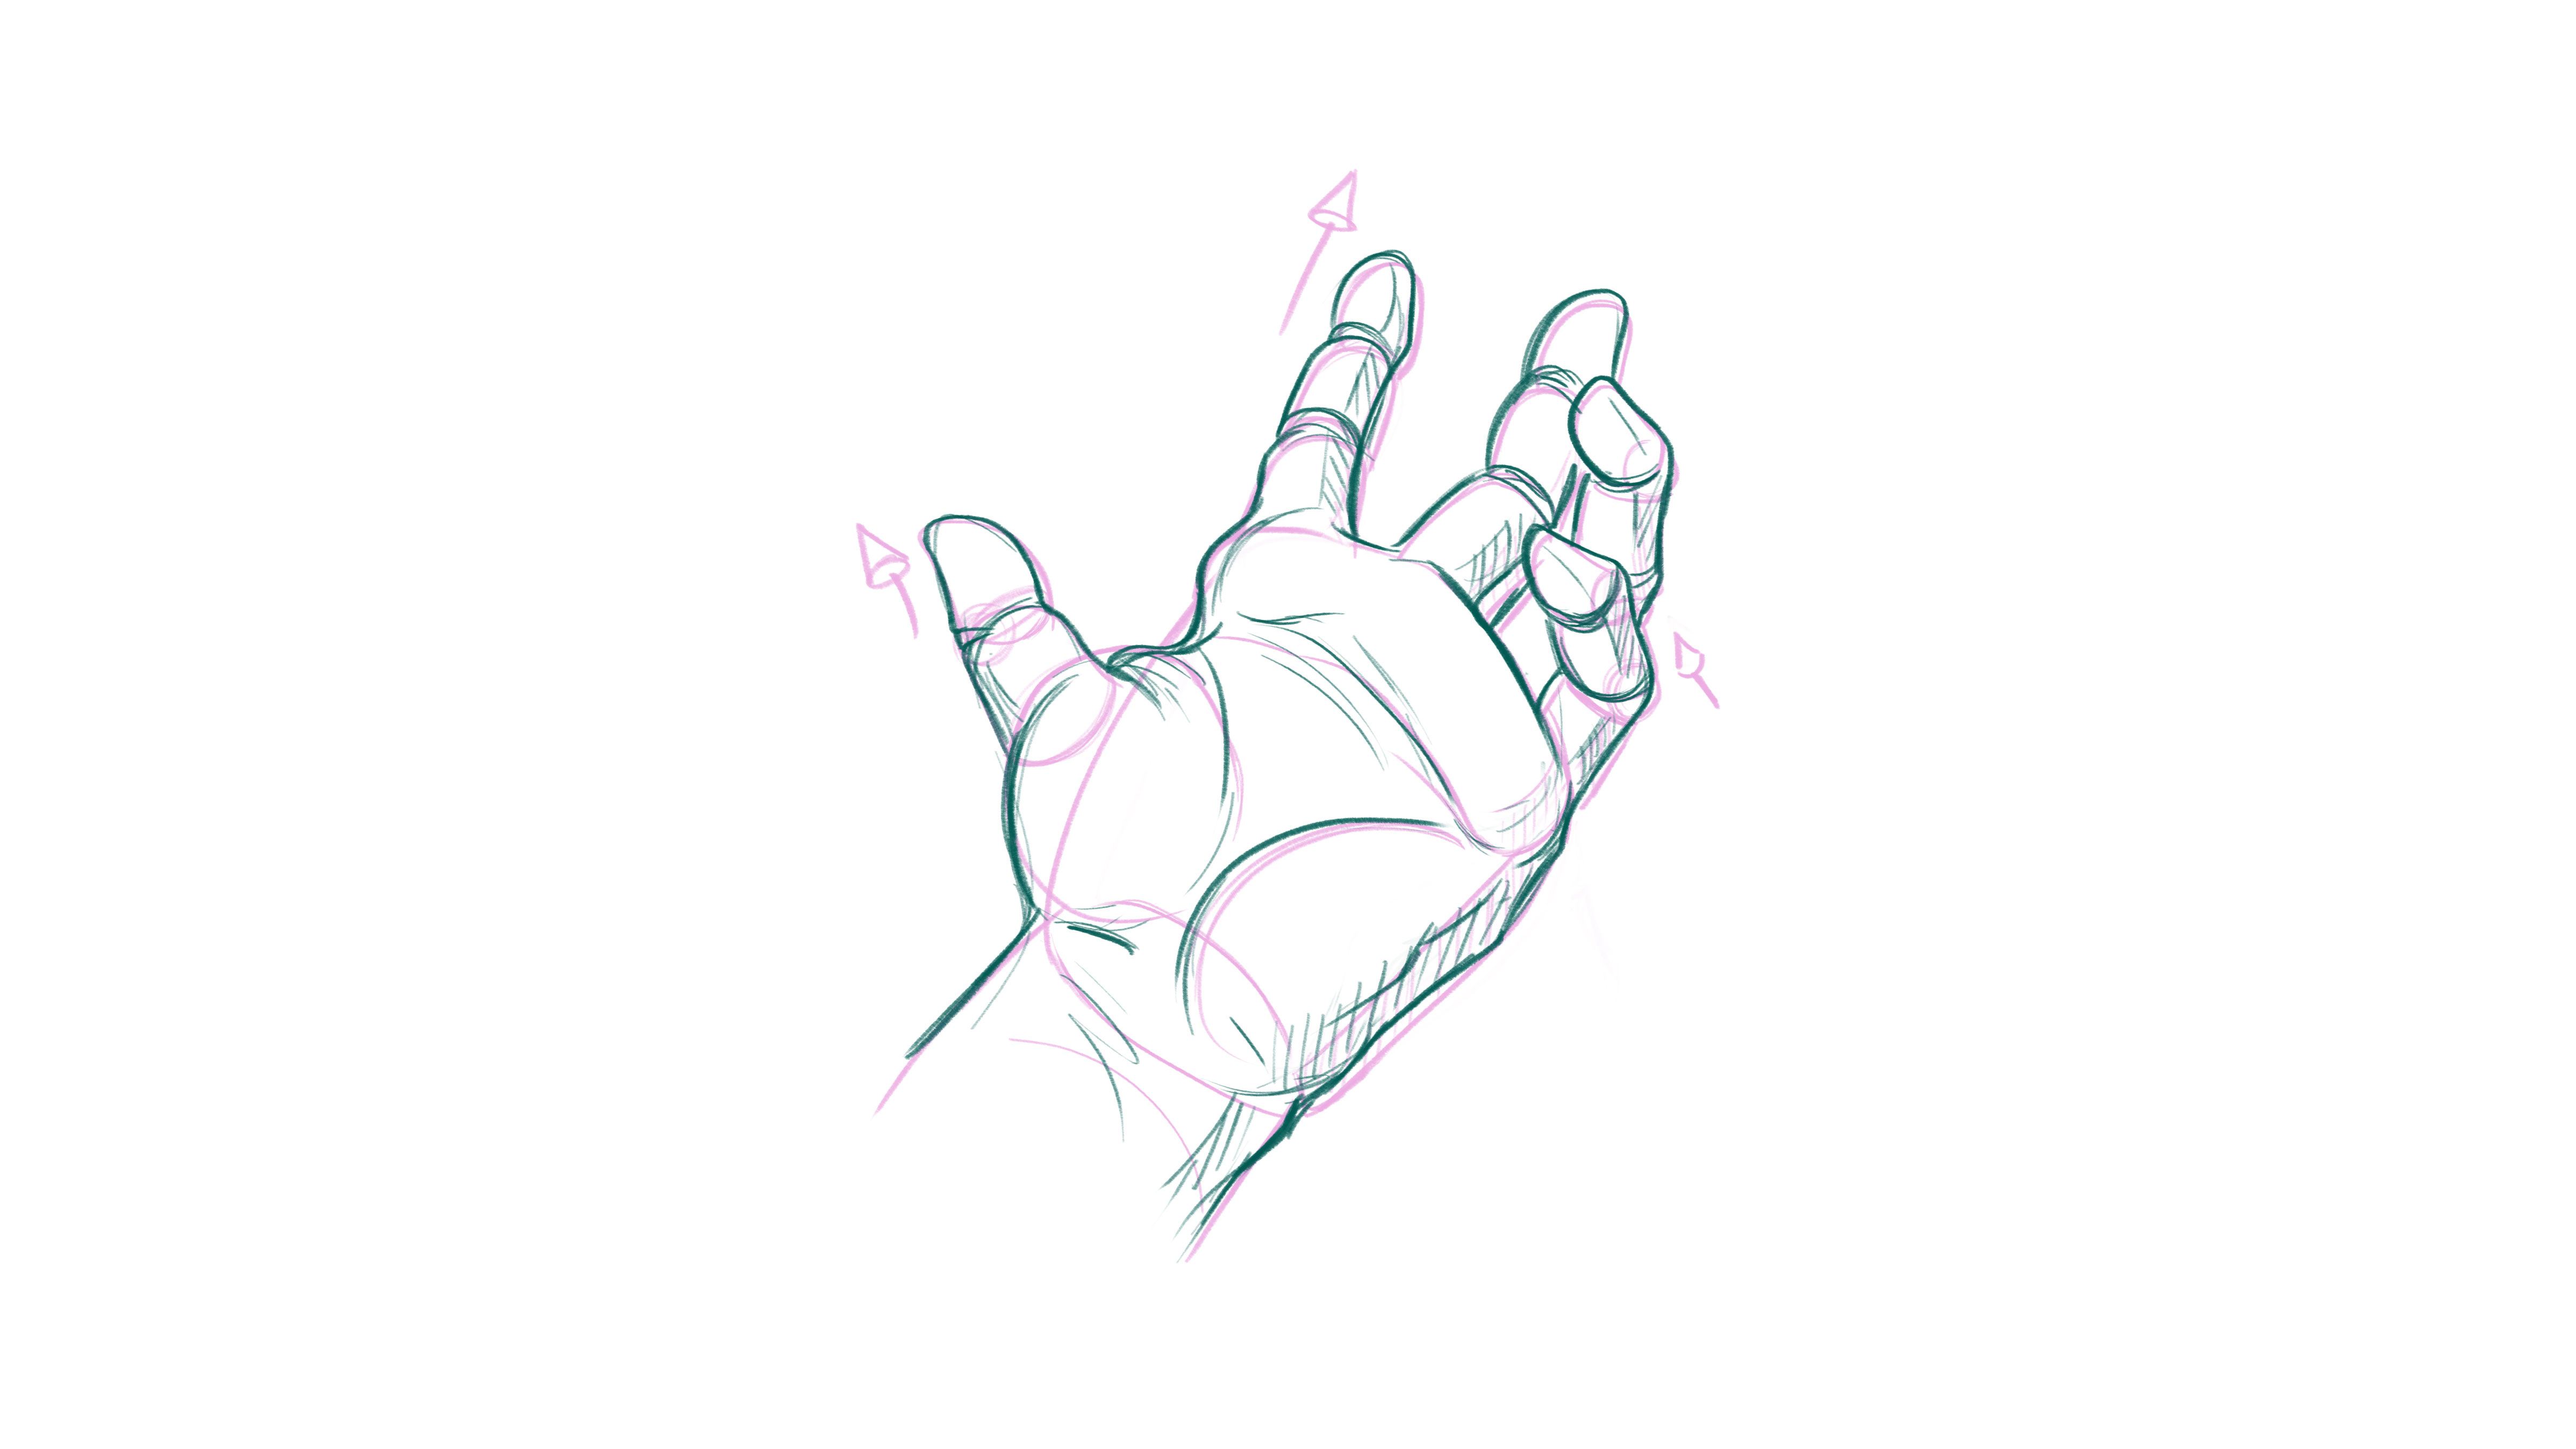 How to draw hands: sketch showing gesture and forms